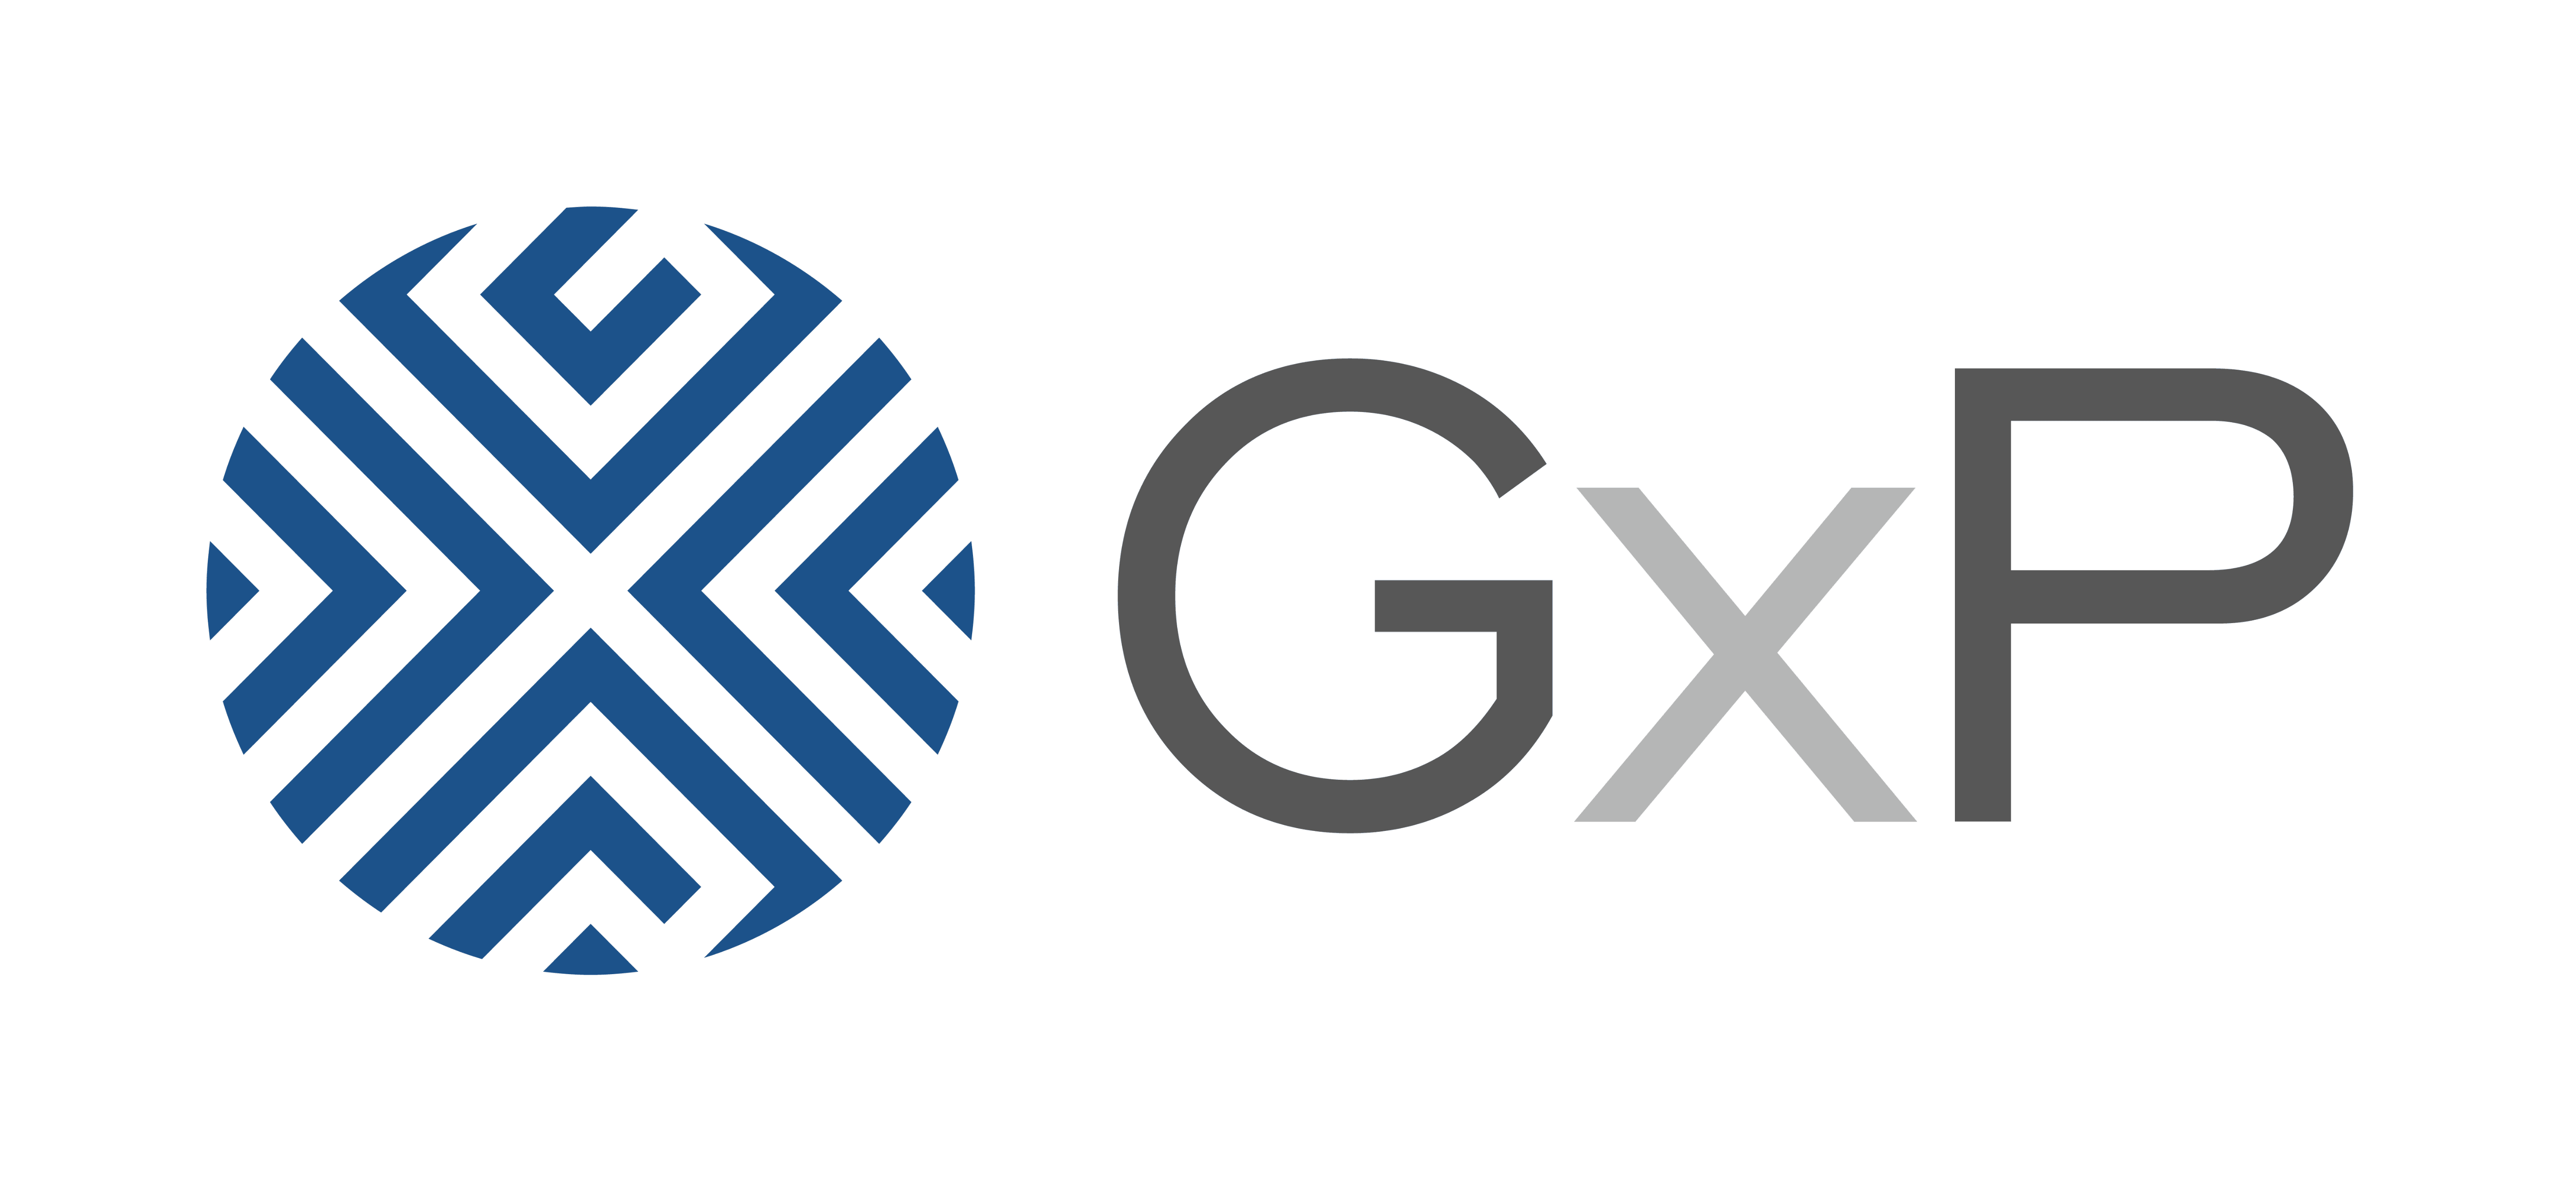 GxP Incorporated.